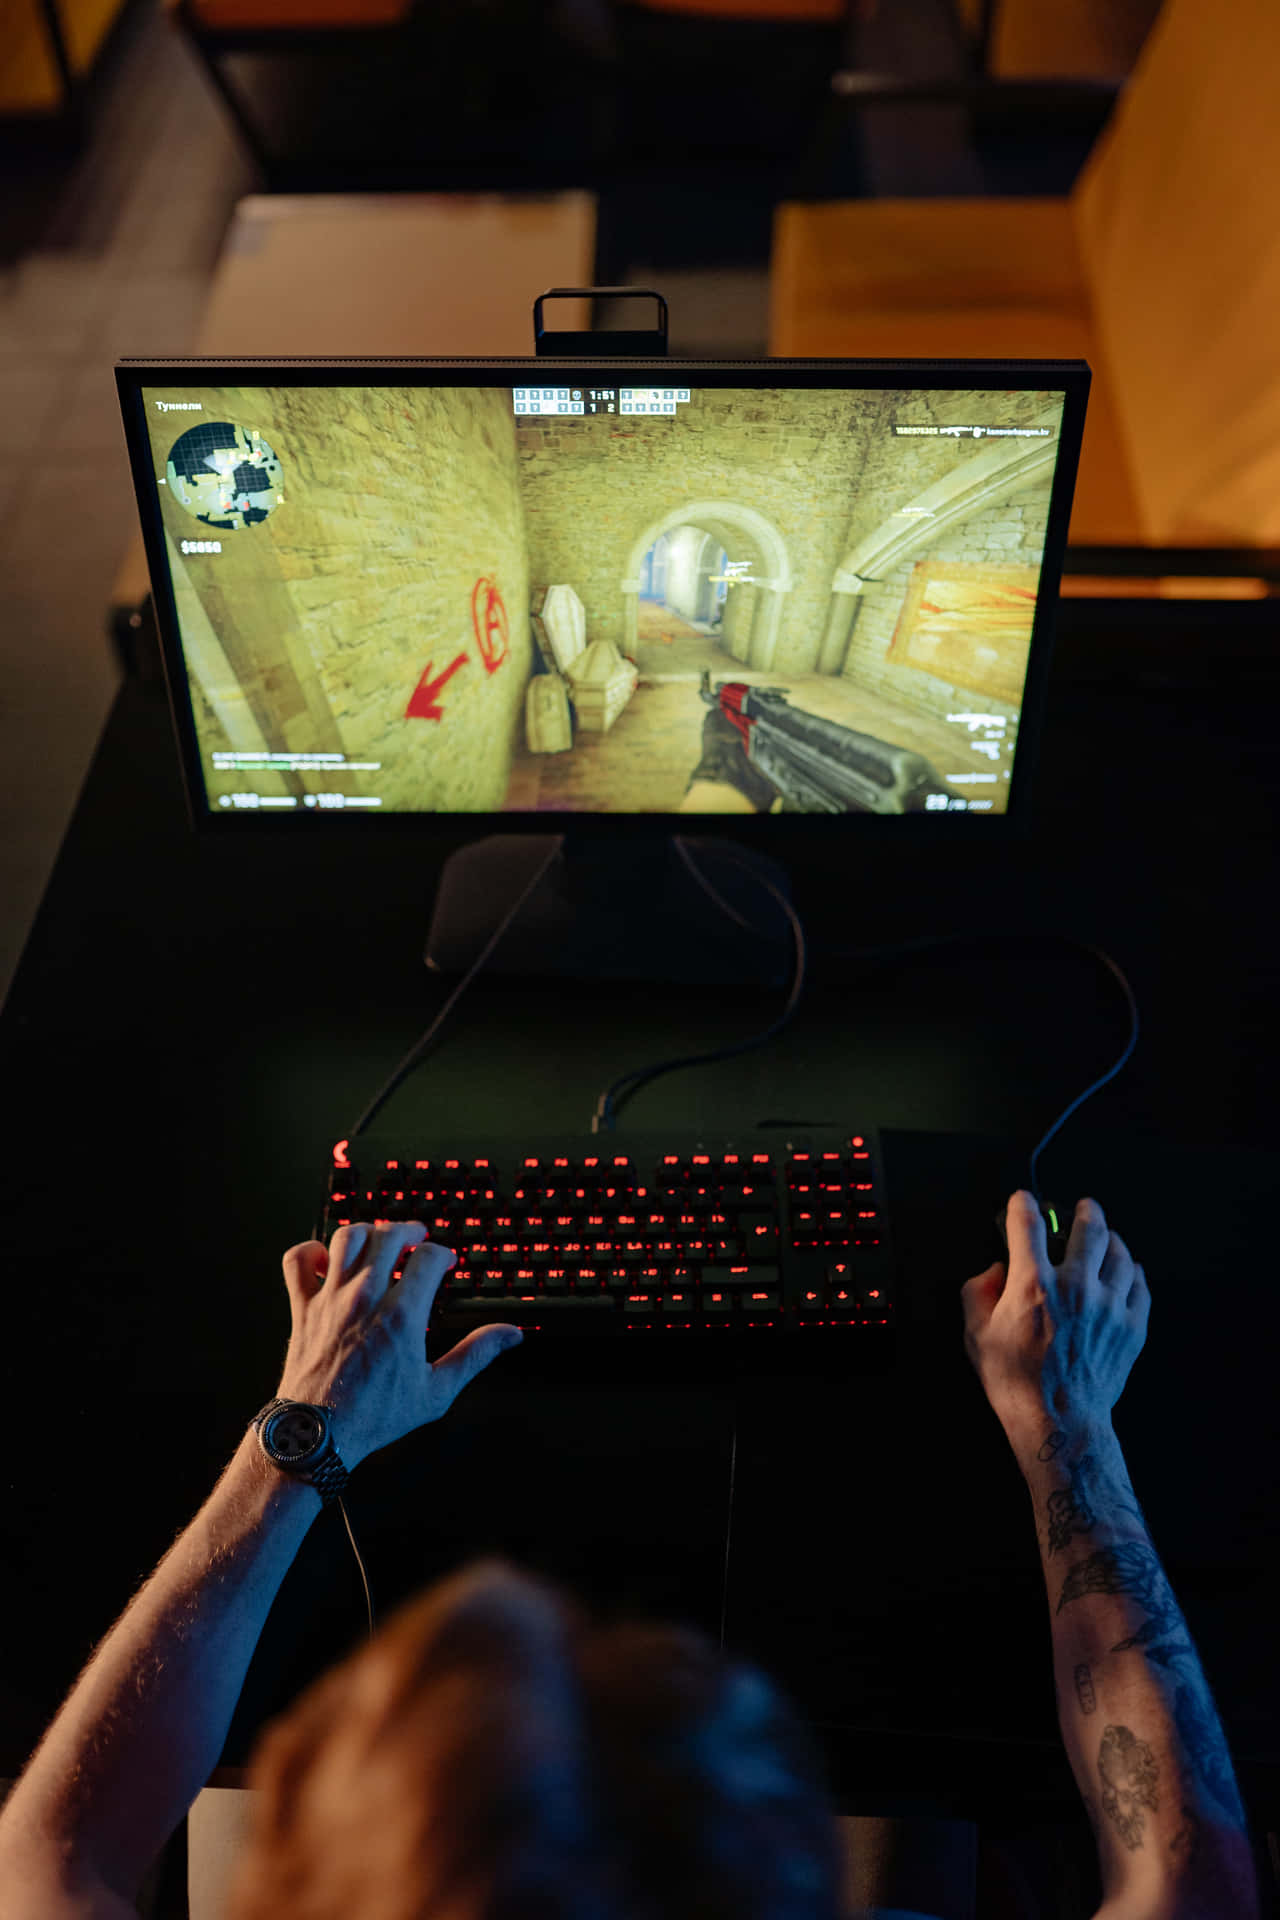 Prepare to take on any game with this powerful gaming PC